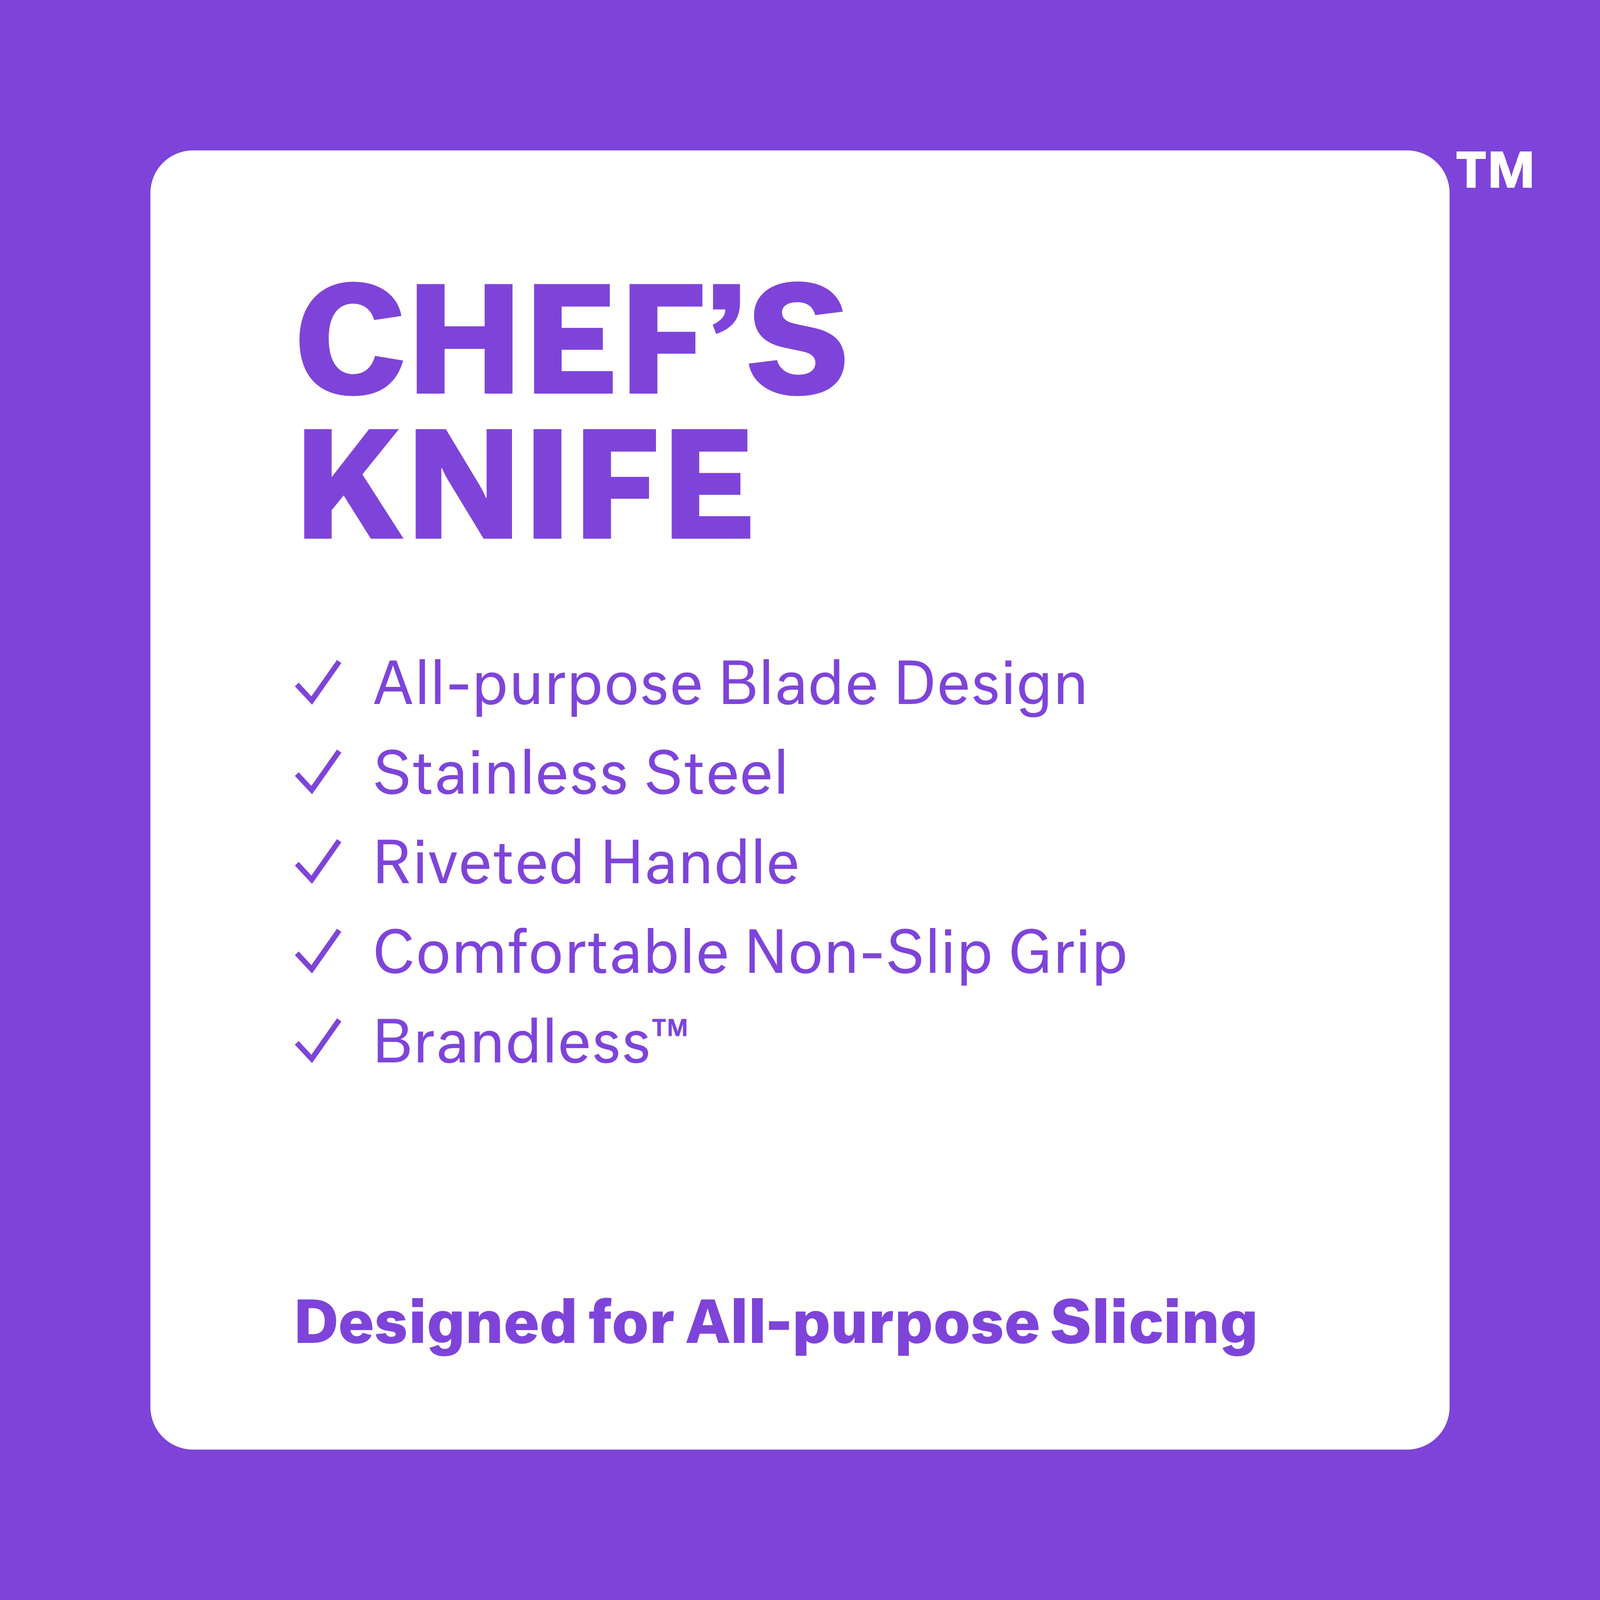 https://cdn.shopify.com/s/files/1/0291/6427/3757/products/53029_chefs_knife_atrribute_sq_c8c639aa-3c6a-45cc-8c44-5d7c15b5a8f7_1600x.png?v=1671779988